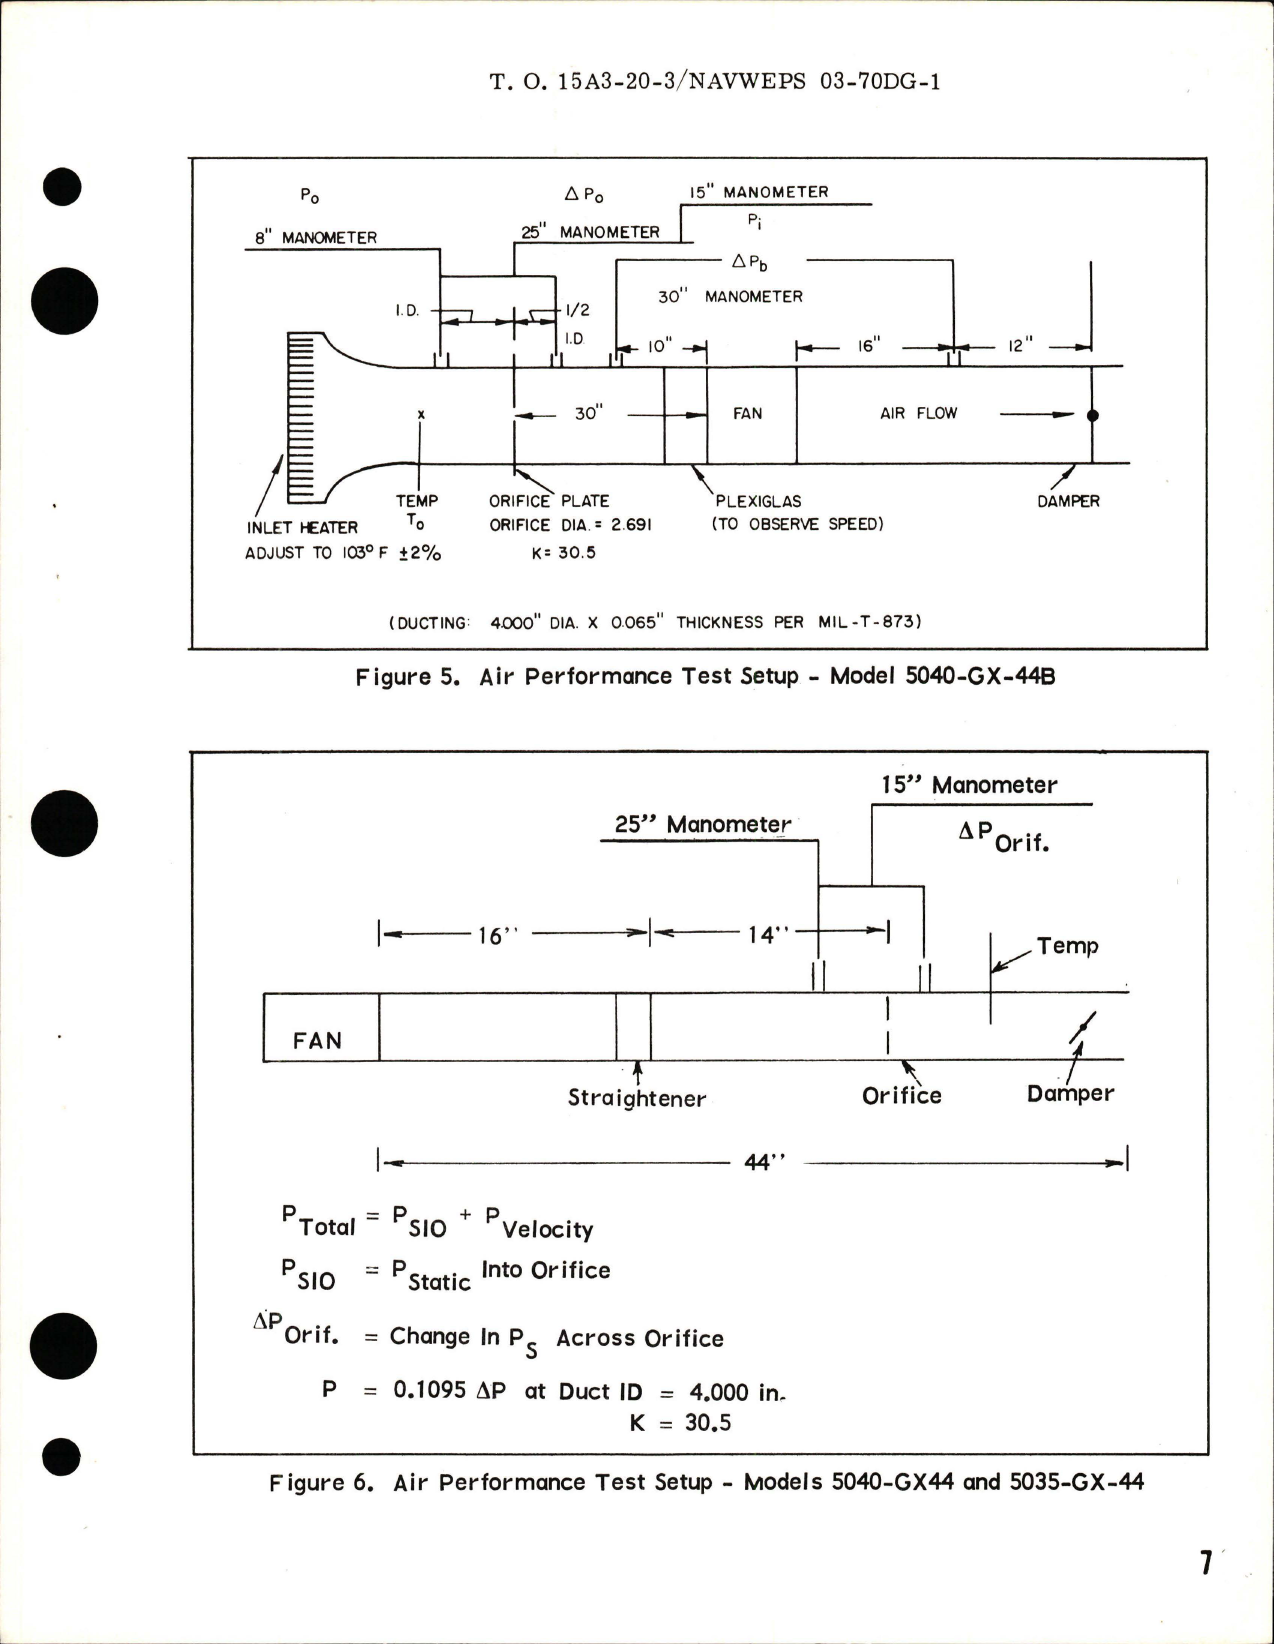 Sample page 7 from AirCorps Library document: Overhaul Instructions with Parts Breakdown for Blower Assembly 